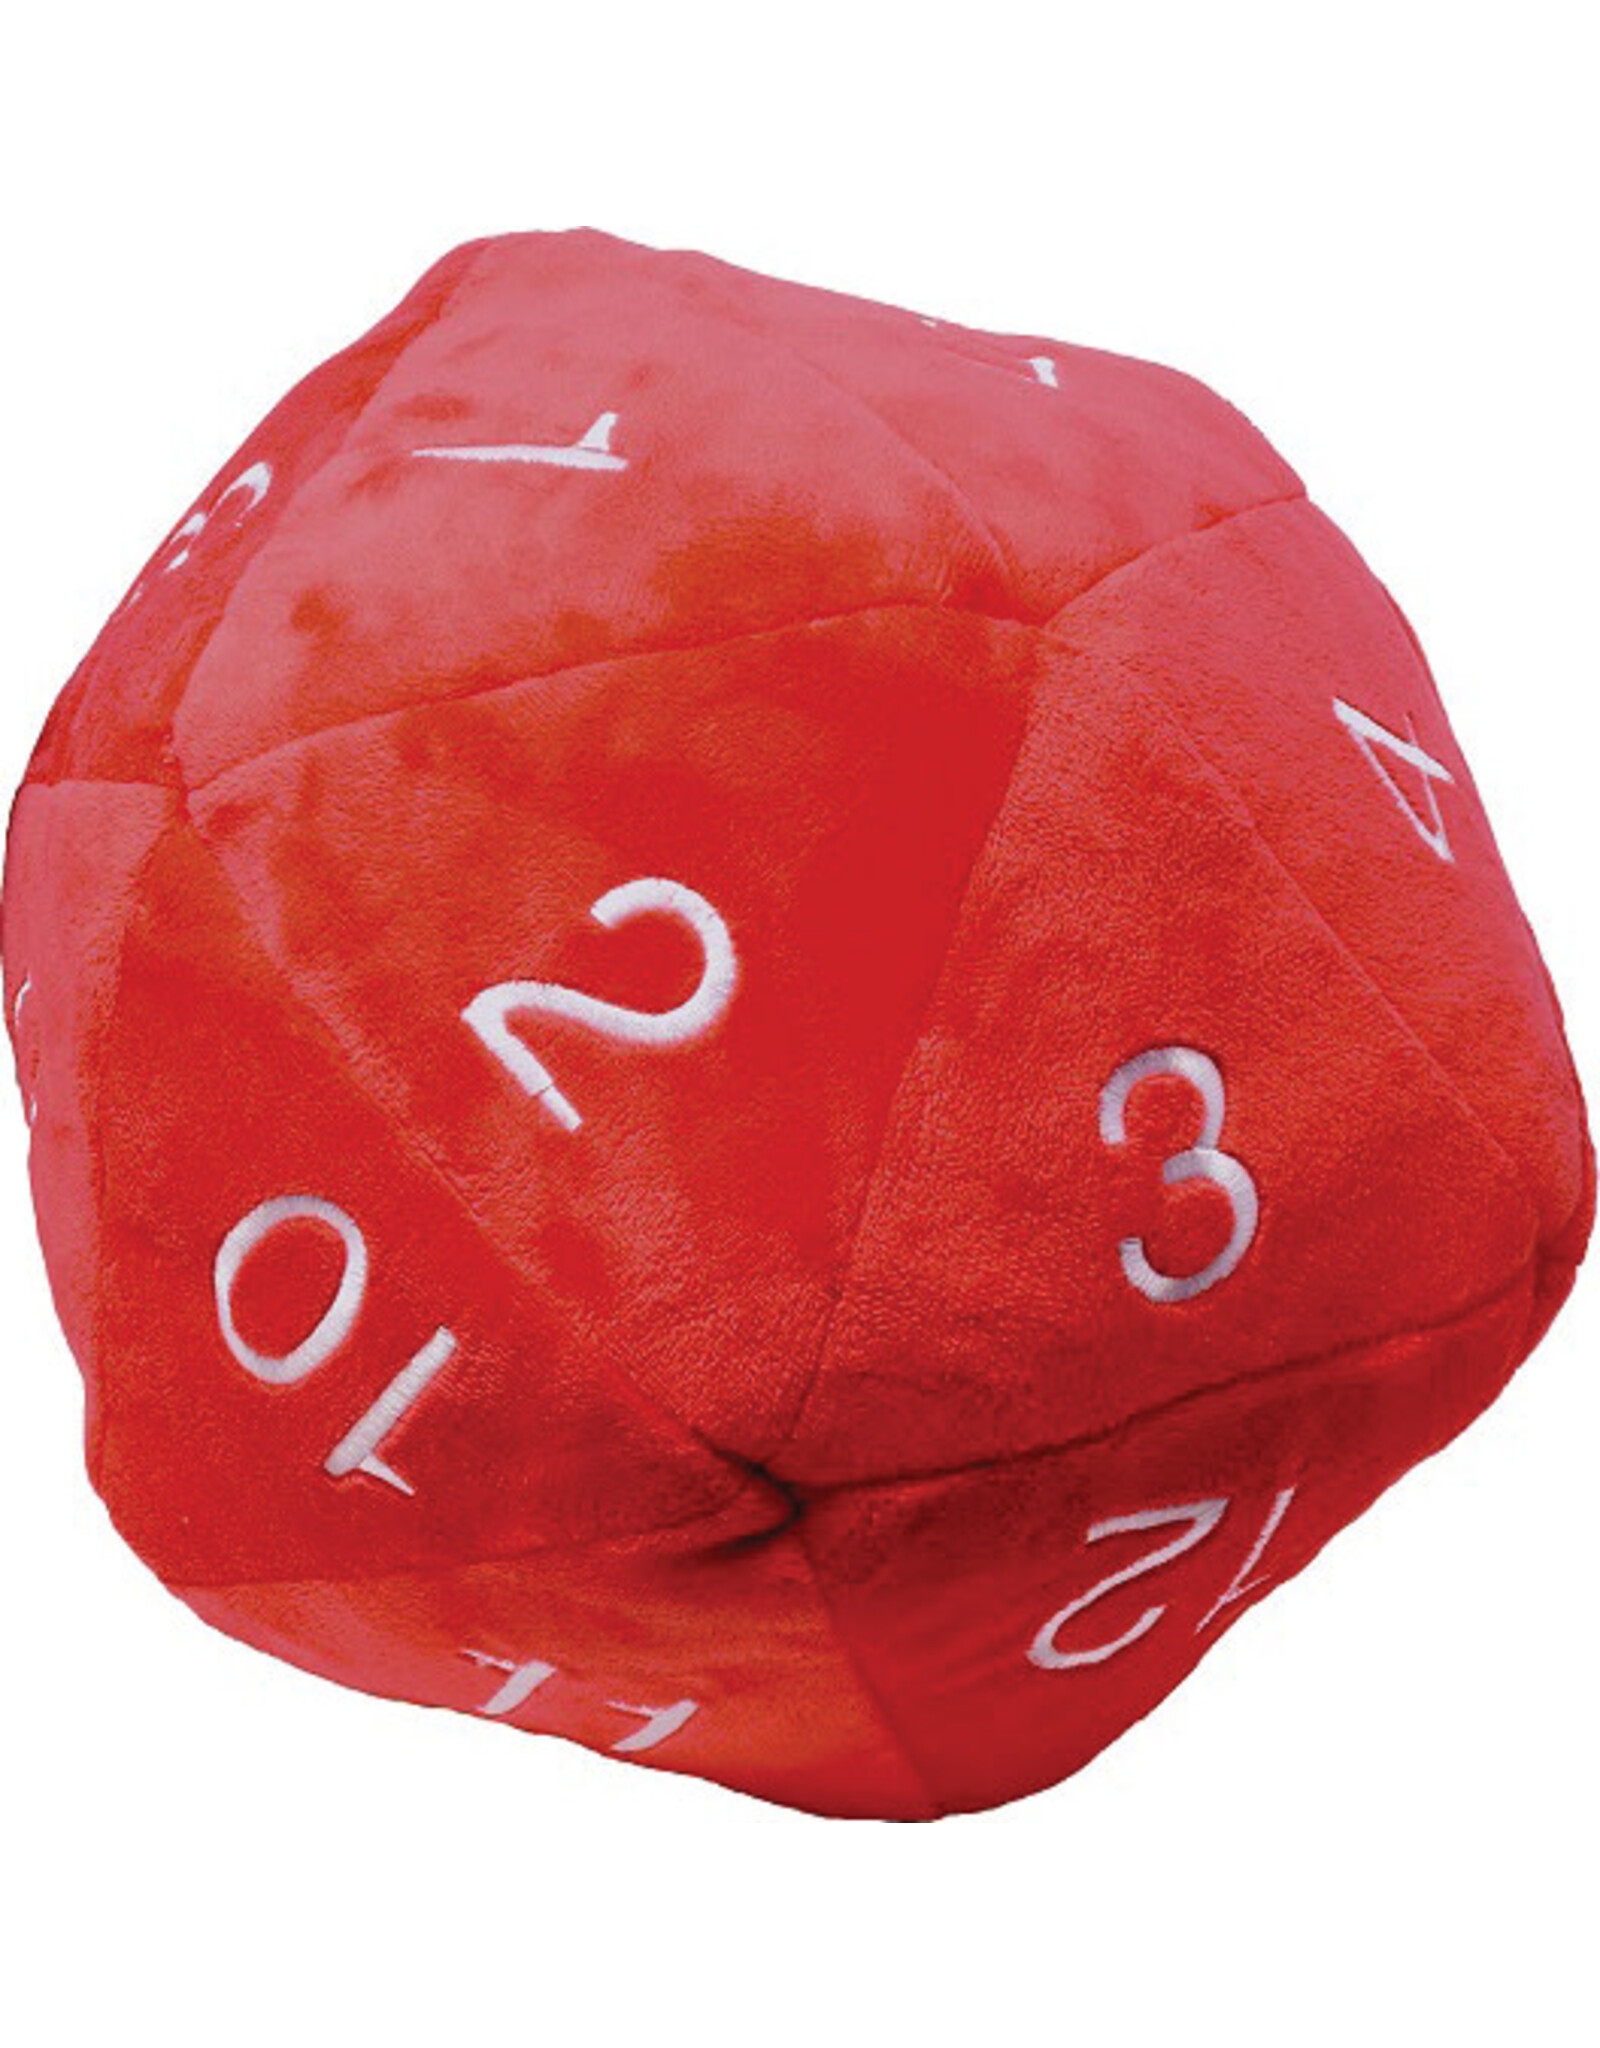 Ultra PRO Jumbo D20 Novelty Dice Plush - Red with White